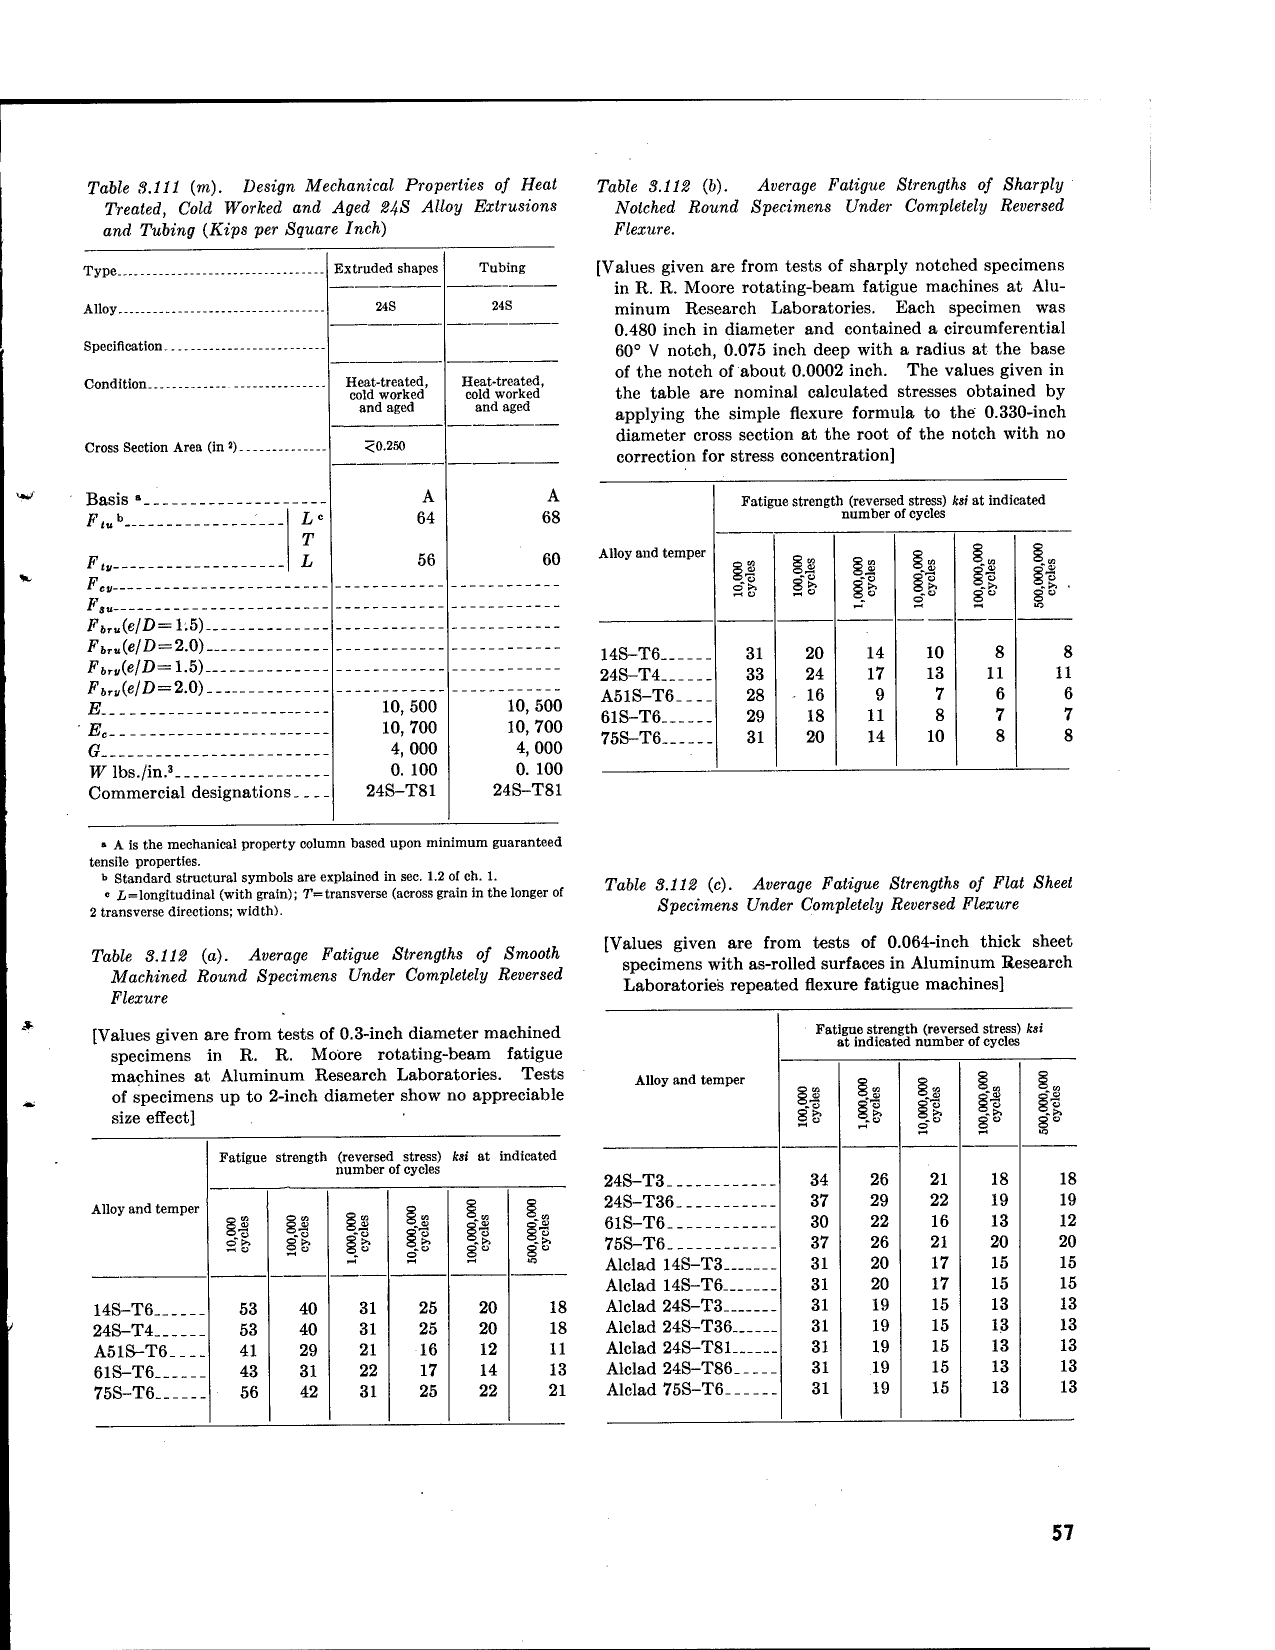 Sample page 71 from AirCorps Library document: Strength of Metal Aircraft Elements